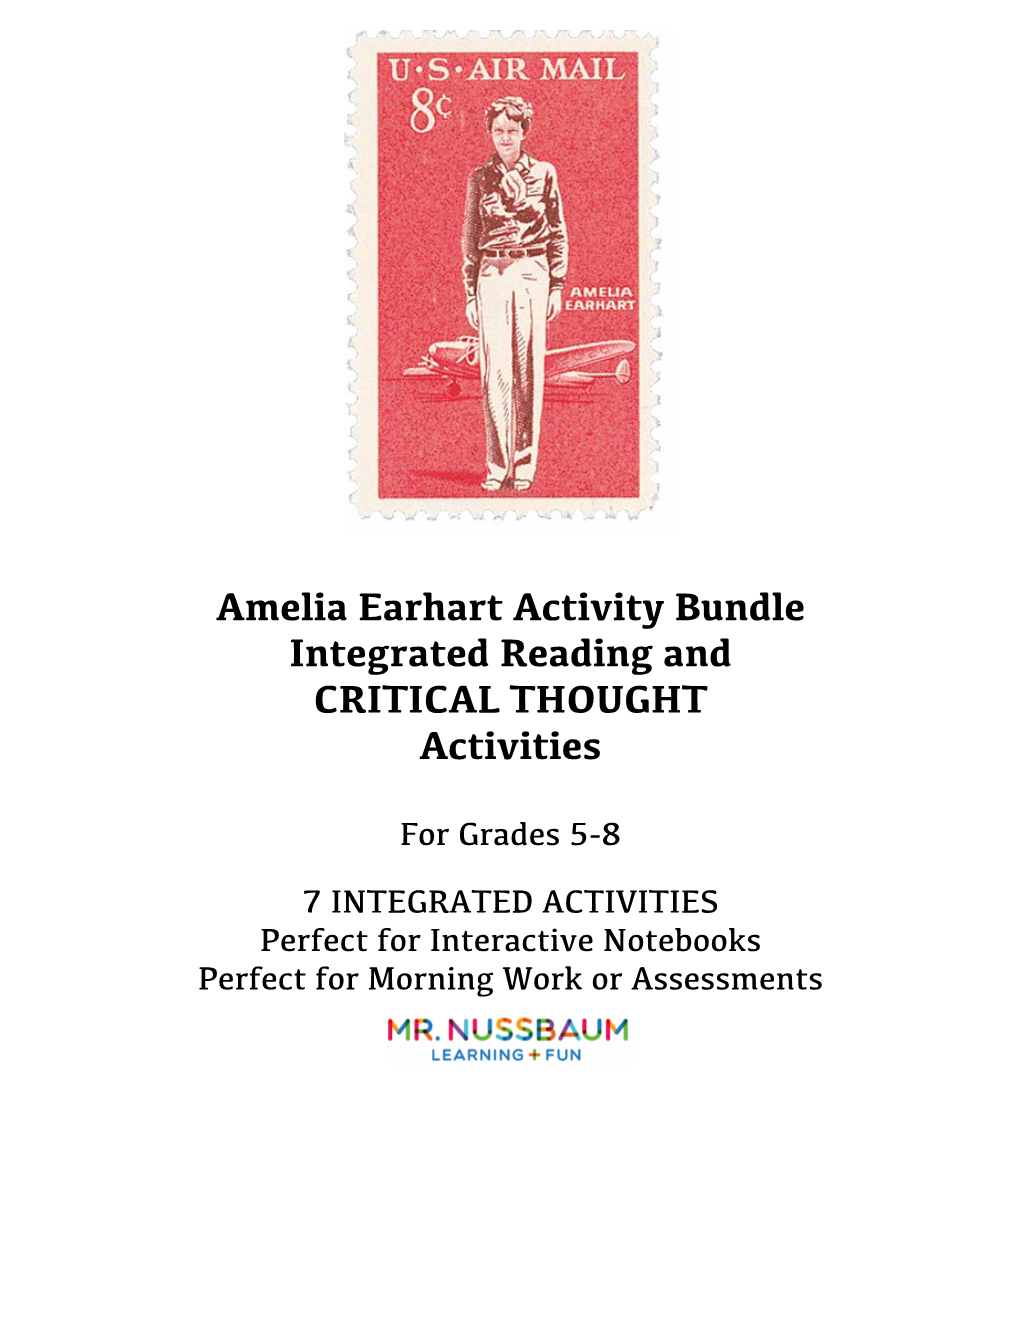 Amelia Earhart Activity Bundle Integrated Reading and CRITICAL THOUGHT Activities